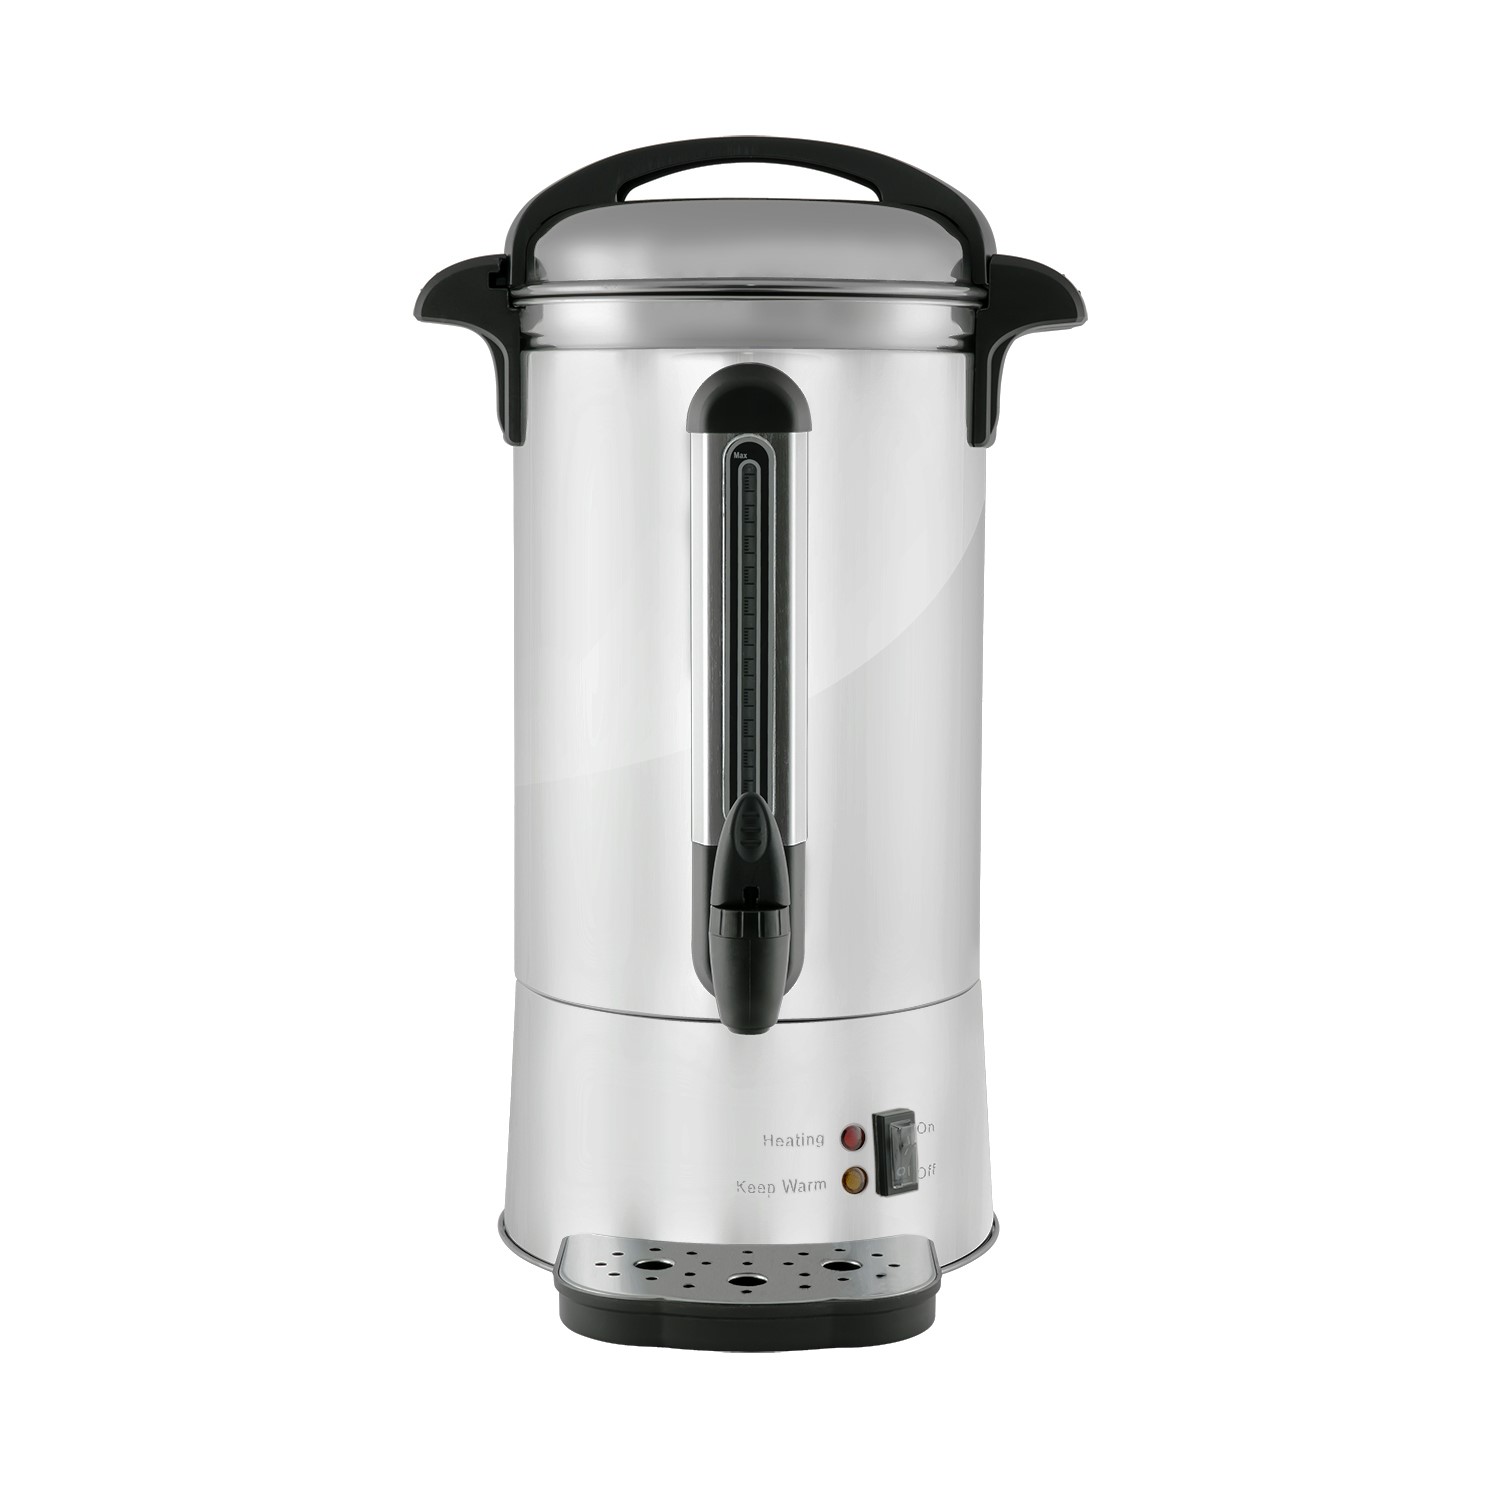 Stainless Steel 10 Litre Catering Kitchen Hot Water Boiler Tea Coffee Urn 1500W 